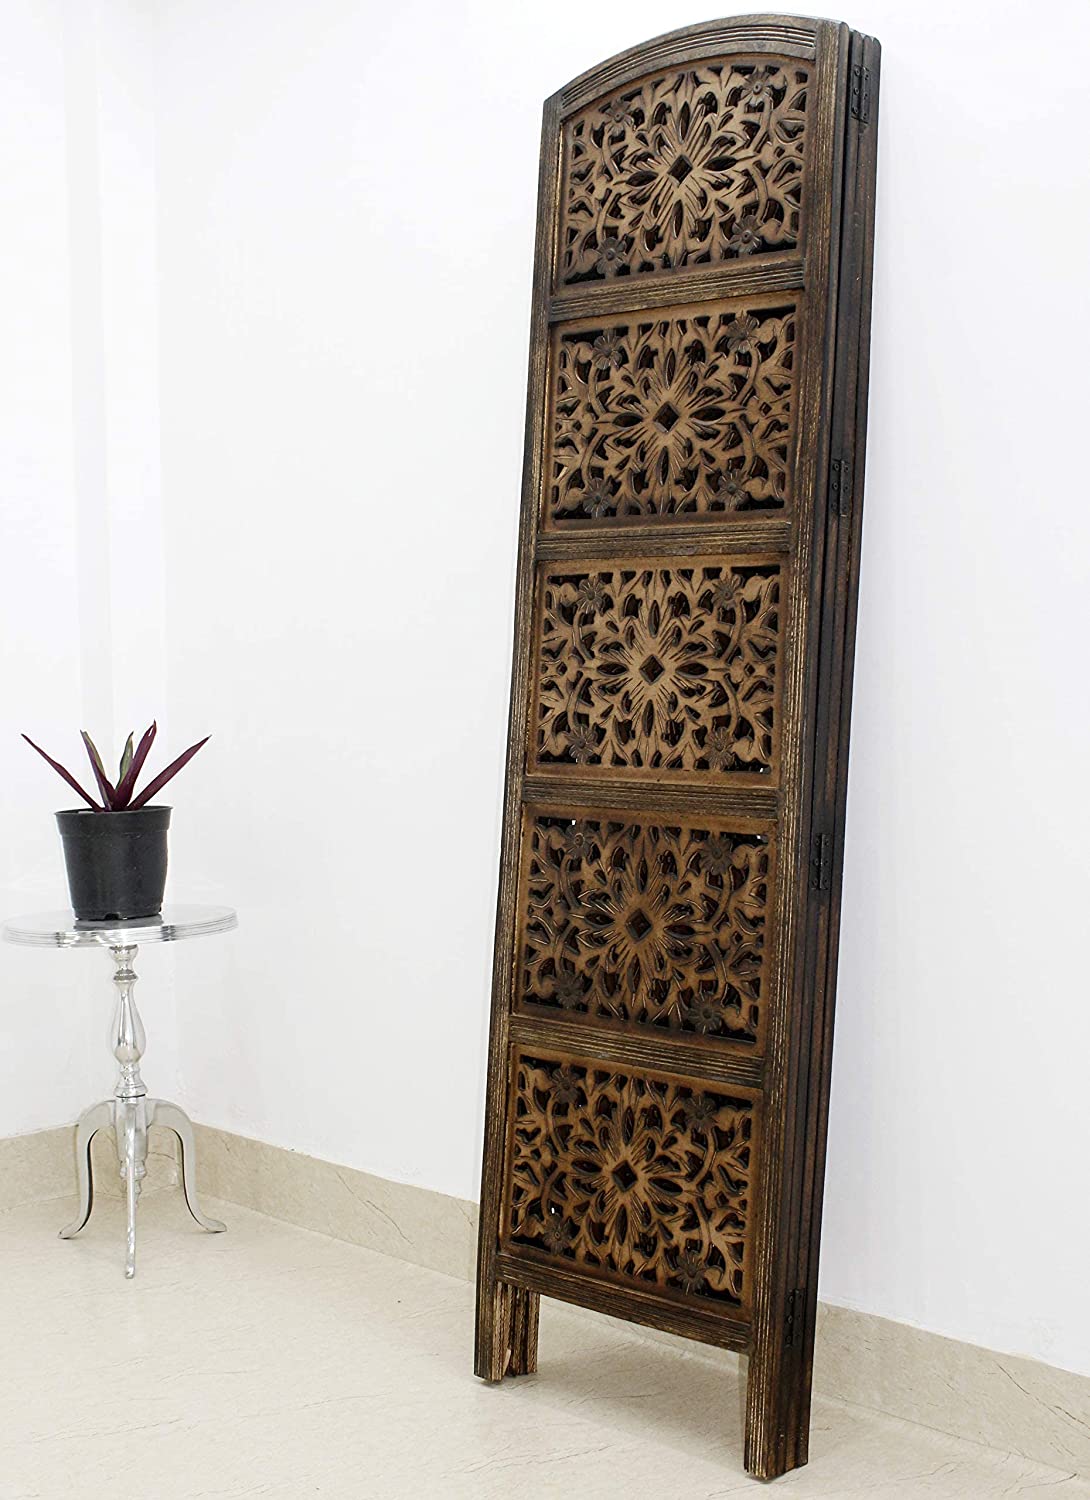 4 panel Wooden Partition Wooden Handcrafted Partition Room Divider Separator for Living Room Office Partition Screen Room Divider Wood Partitions for Home Kitchen & Office